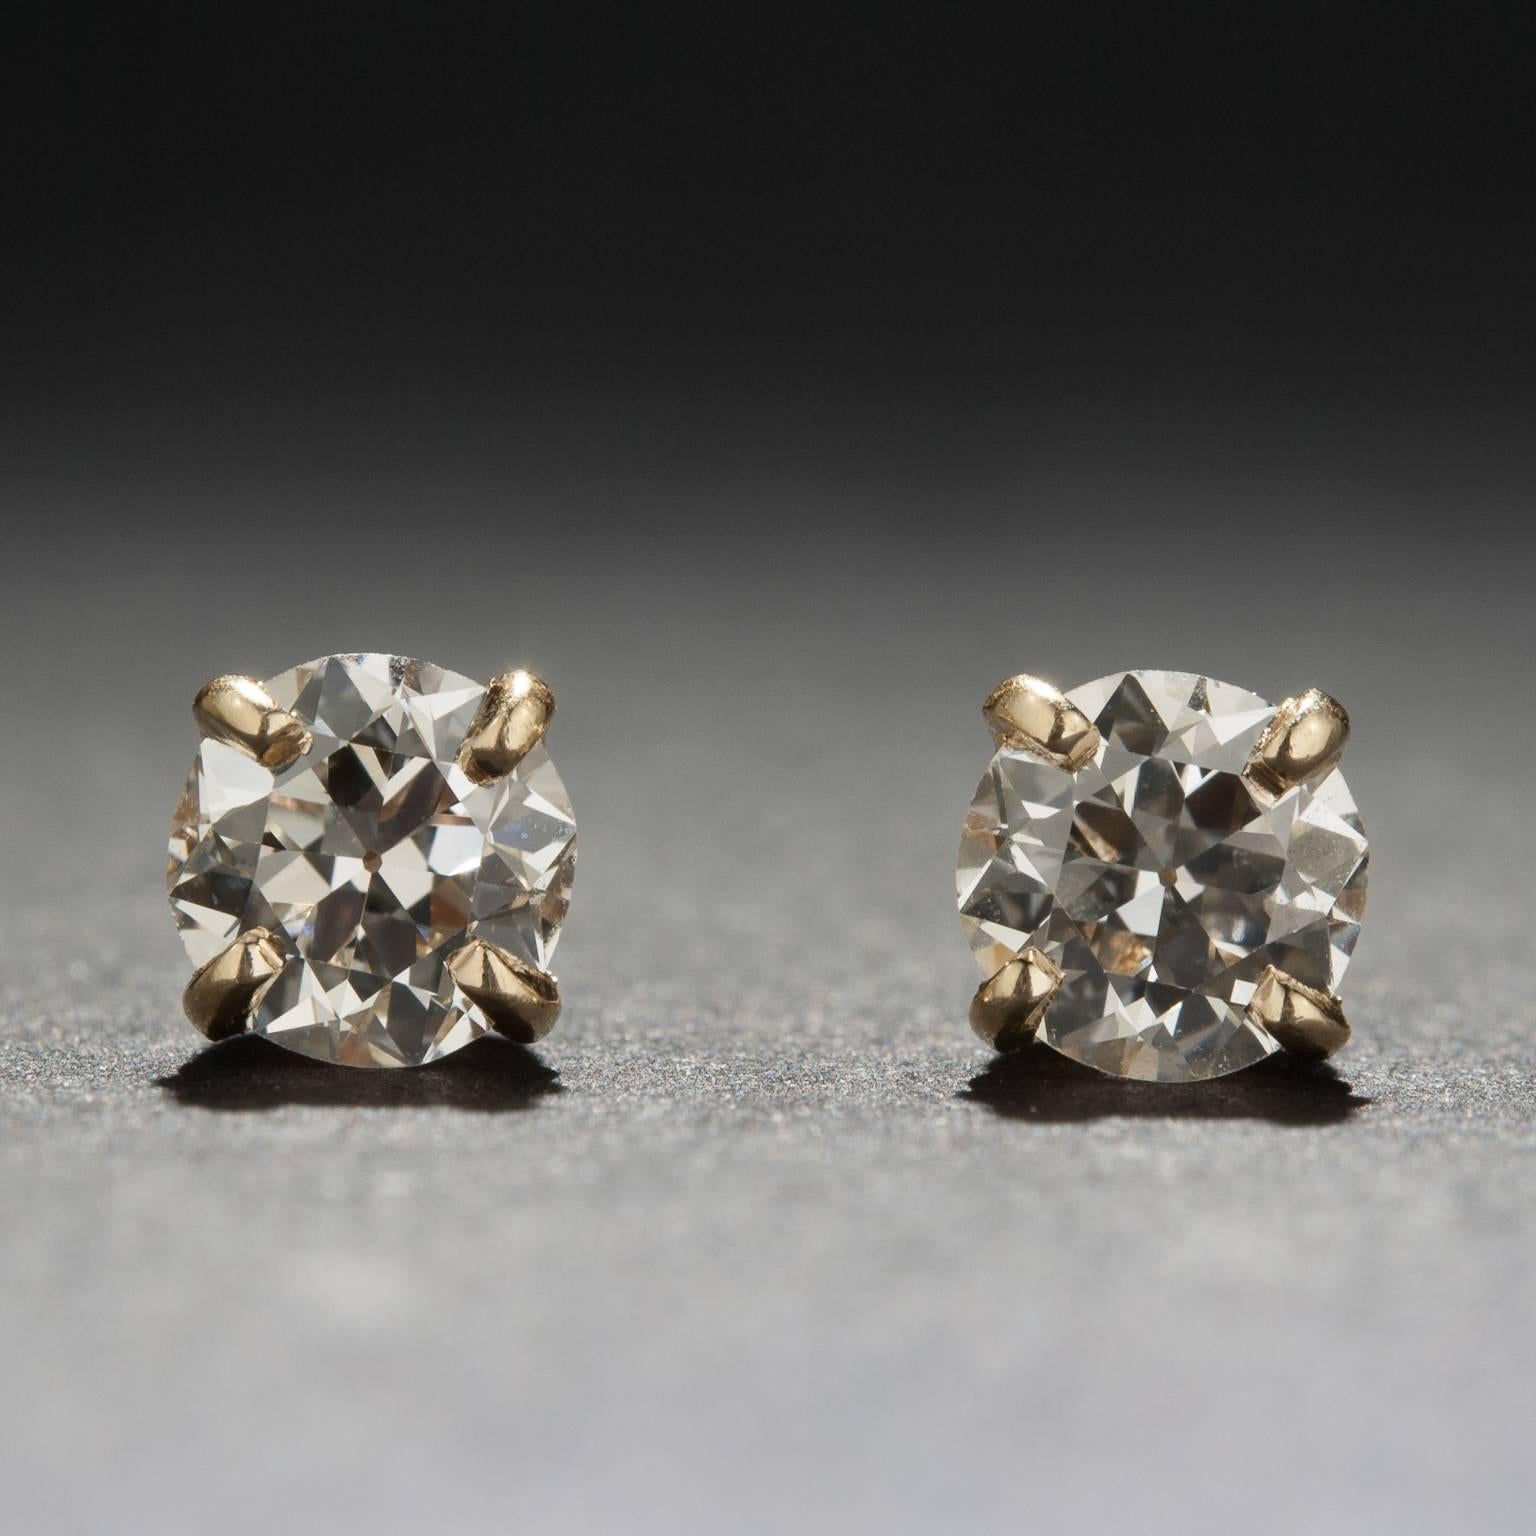 These stunning diamond studs are made of of two Old European Cut diamonds with a combined weight of 1.00 carats. Each diamond is secured by a four-prong 14k yellow gold setting with a screw-back fastener. 